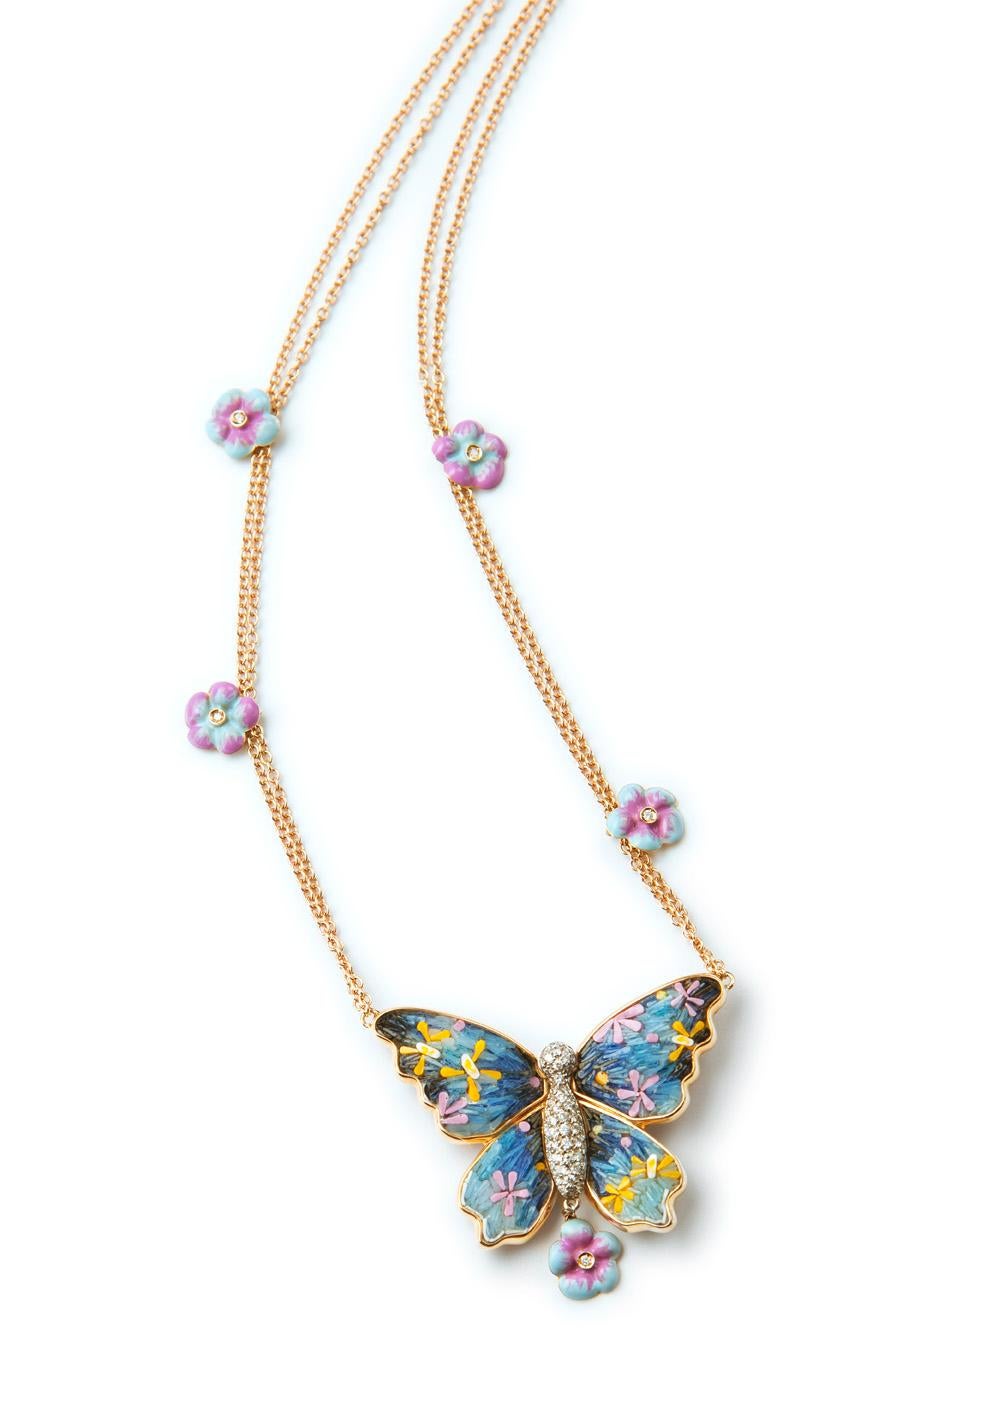 Romantic Necklace Yellow Gold White Diamonds Enamel Hand Decorated with Micro Mosaic For Sale